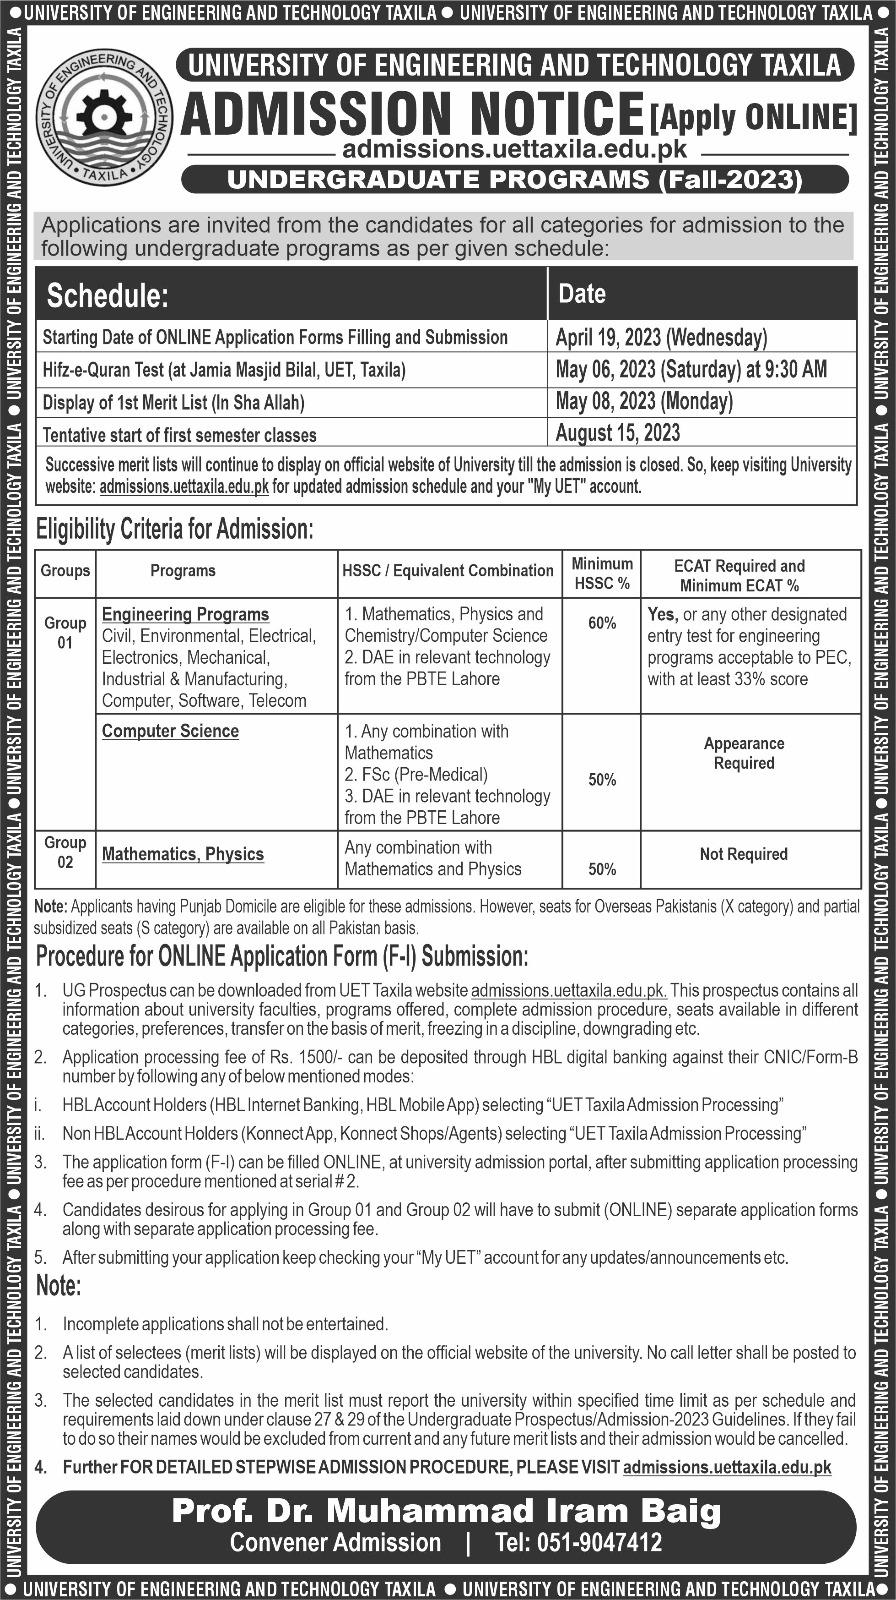 UET TAxila Admission Schedule Fall 2023 Under Graduate Programs